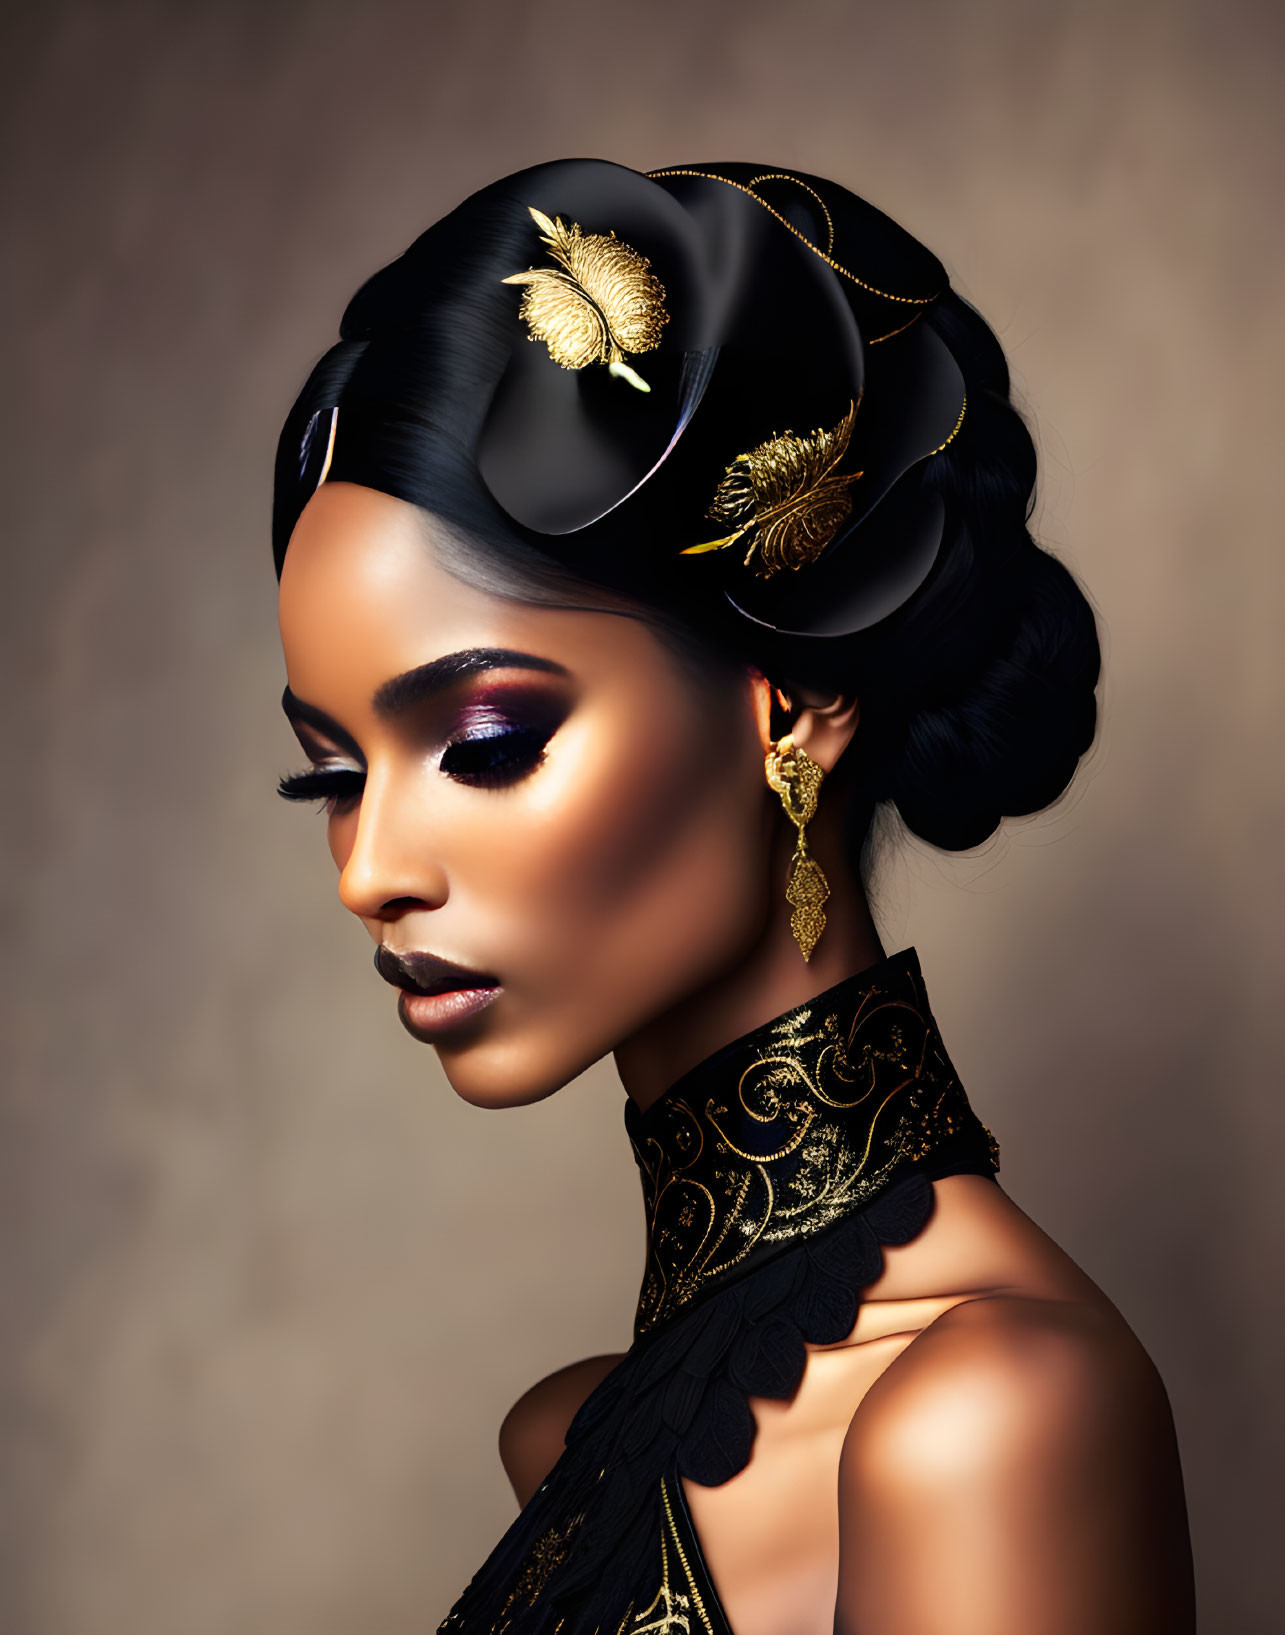 Woman with Elegant Makeup and Black/Gold Headdress, Earrings, and Choker